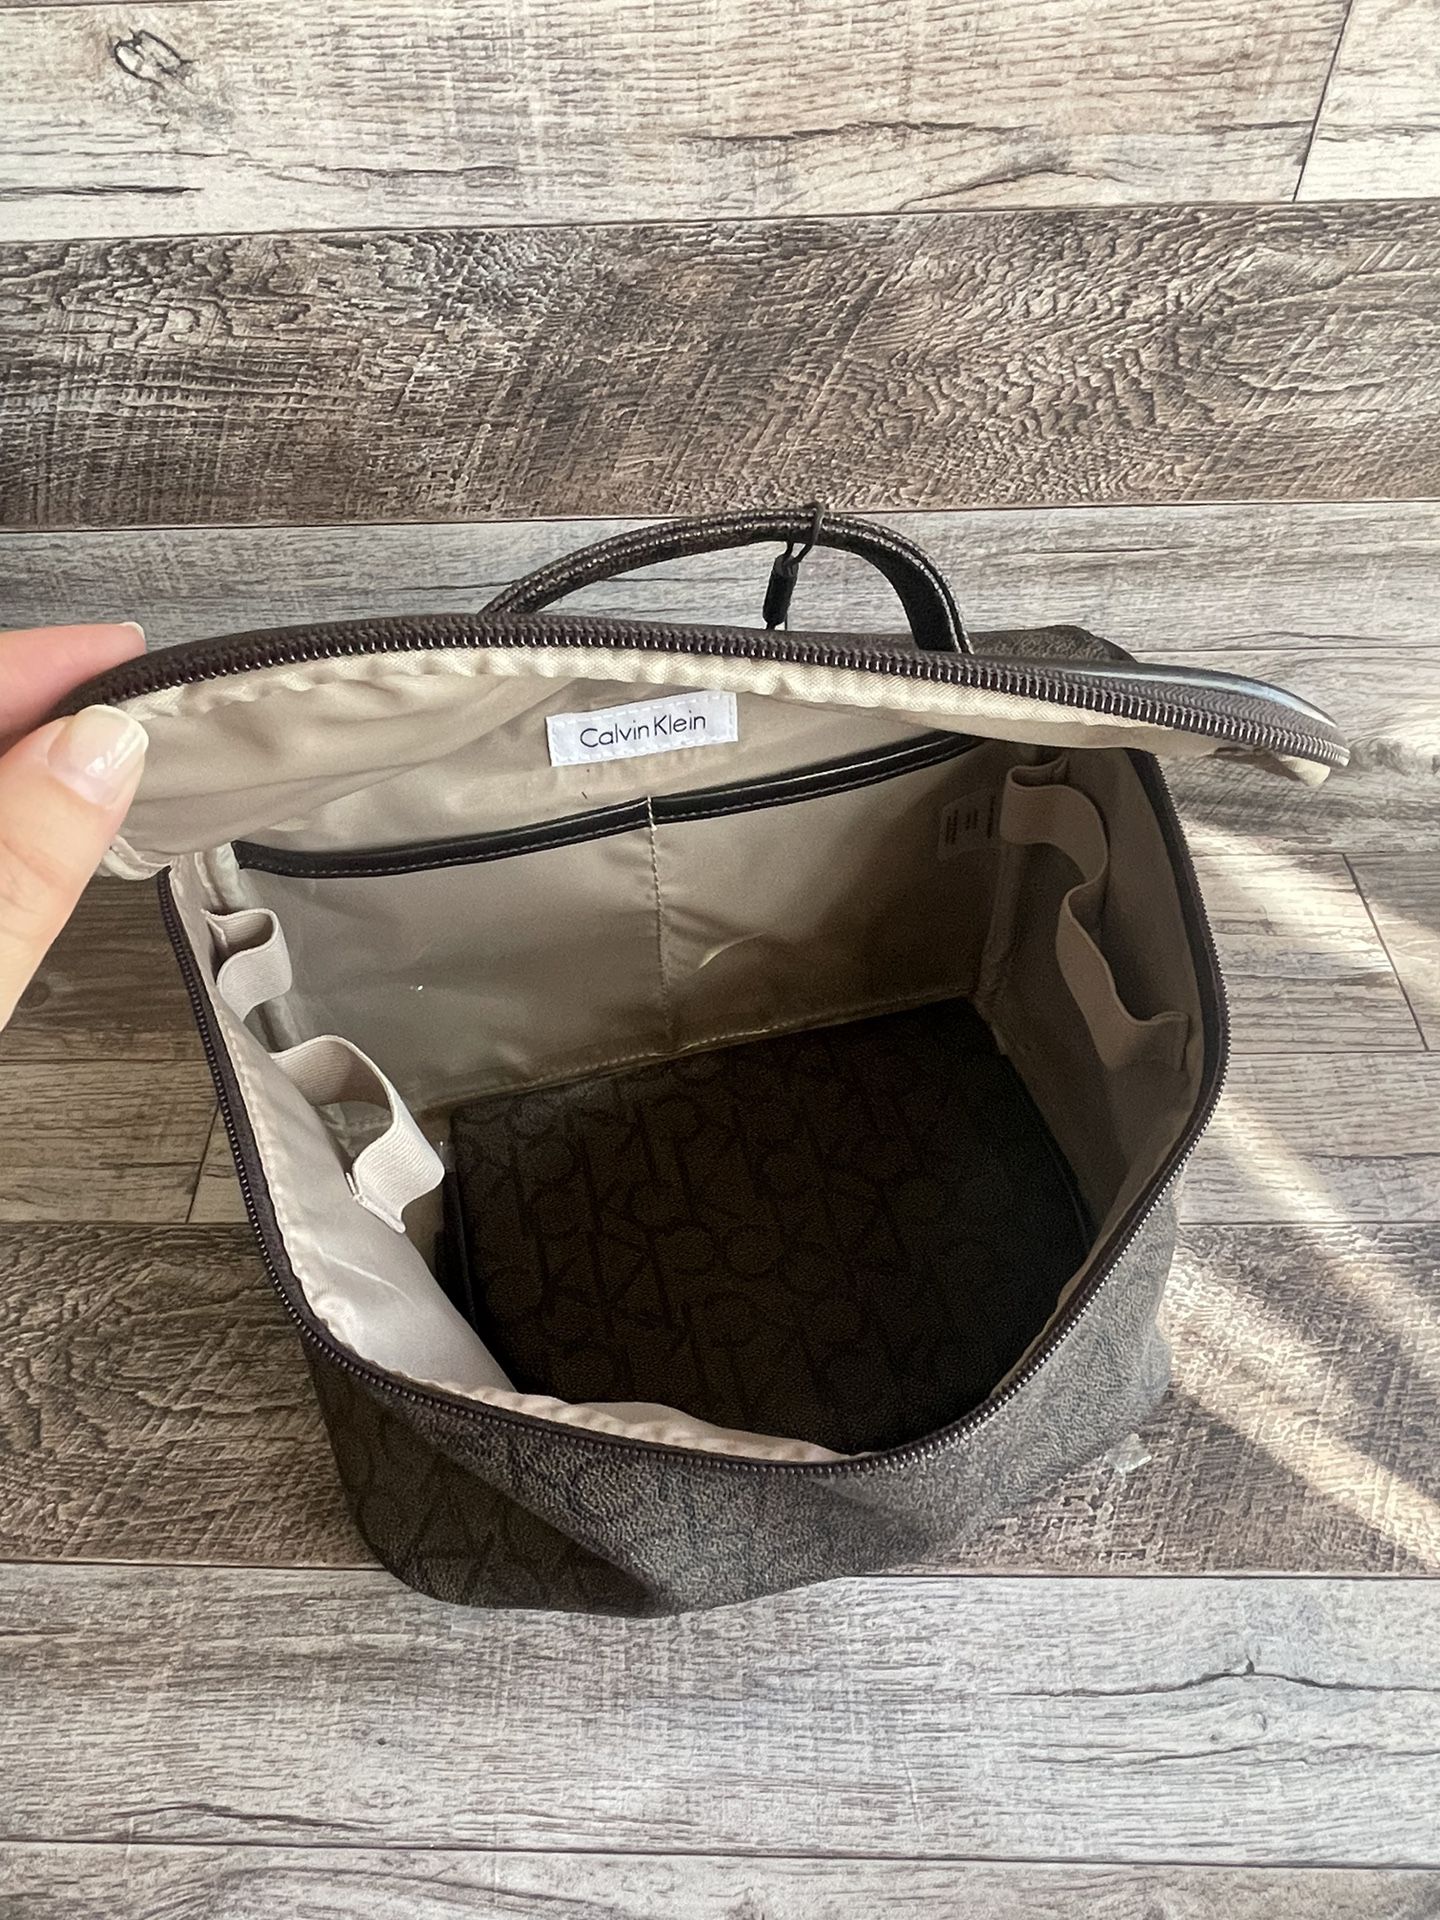 Little brown bag cosmetics case for Sale in Long Beach, CA - OfferUp